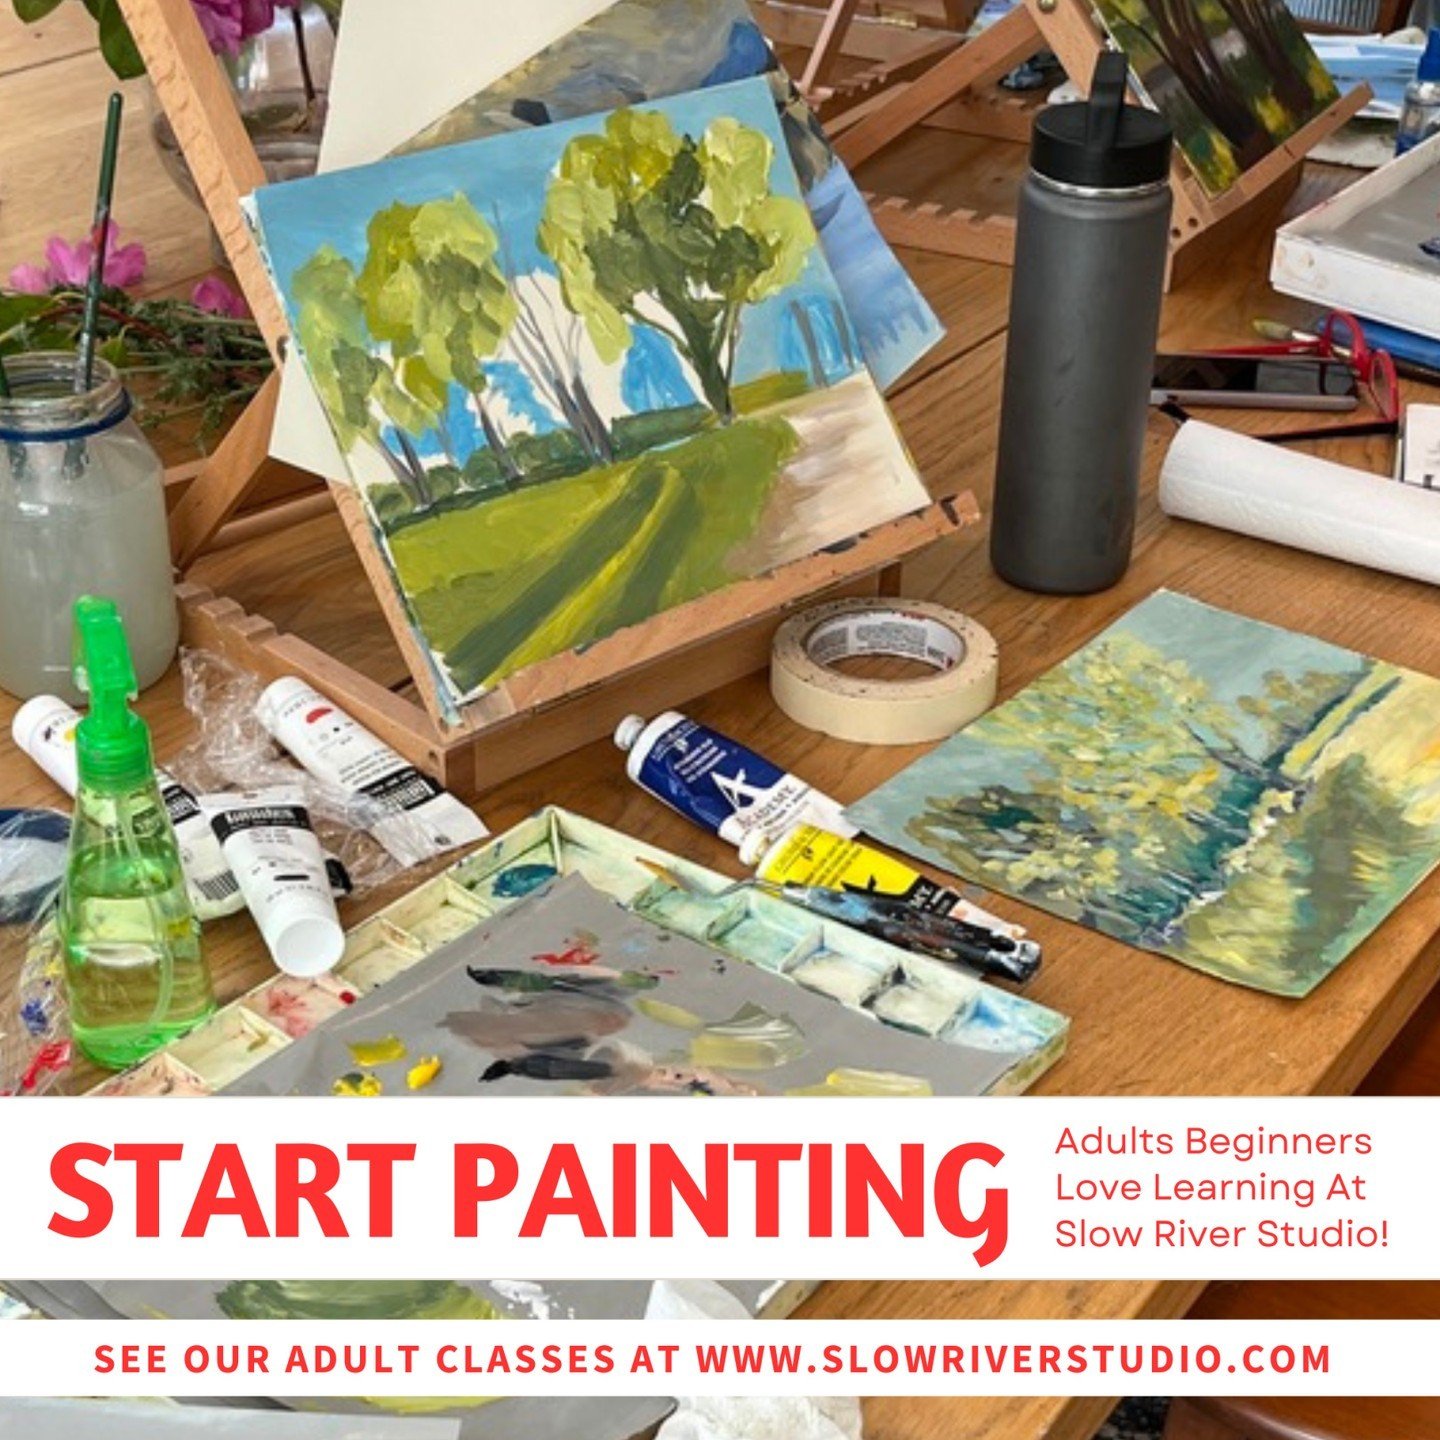 🔆 What is your favorite LANDSCAPE PAINTING spot? 🔆  We love painting across Essex County and we are collecting new spots.  Can you share an idea?

And then we  hope you will join us for a plein air or in studio landscape painting class. We have so 